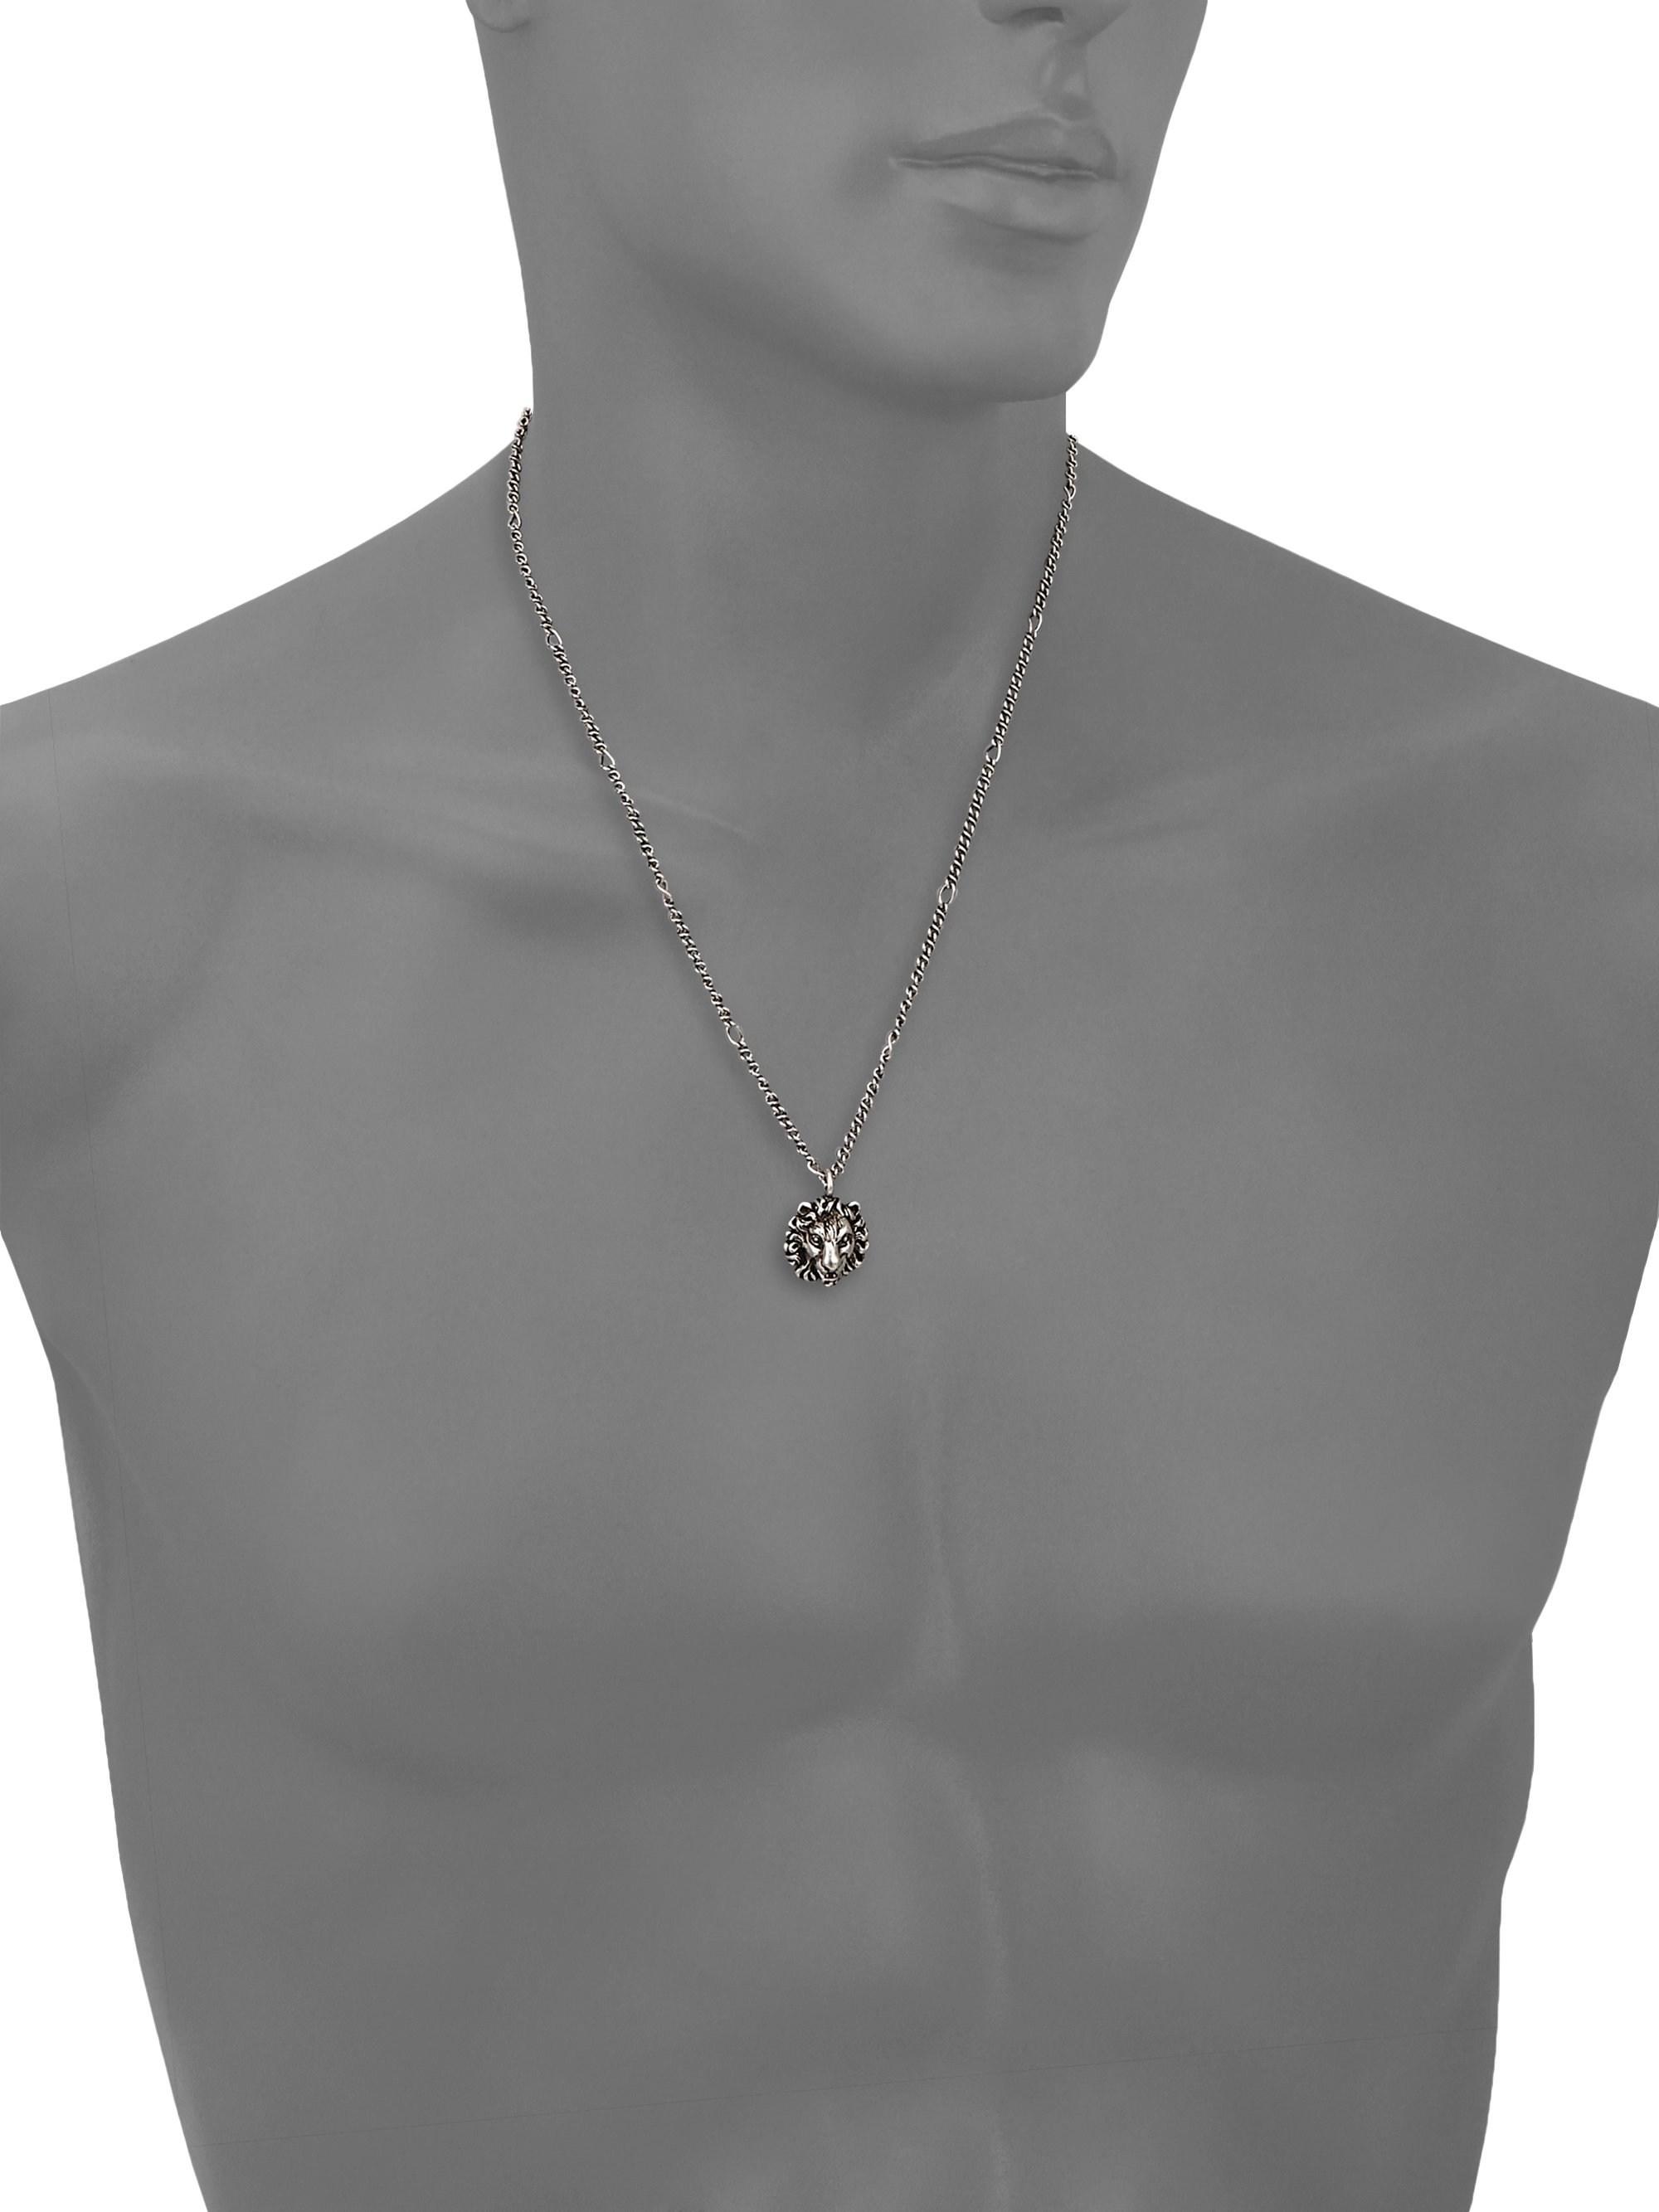 Gucci Necklace With Lion Head Pendant Online - anuariocidob.org 1689725997